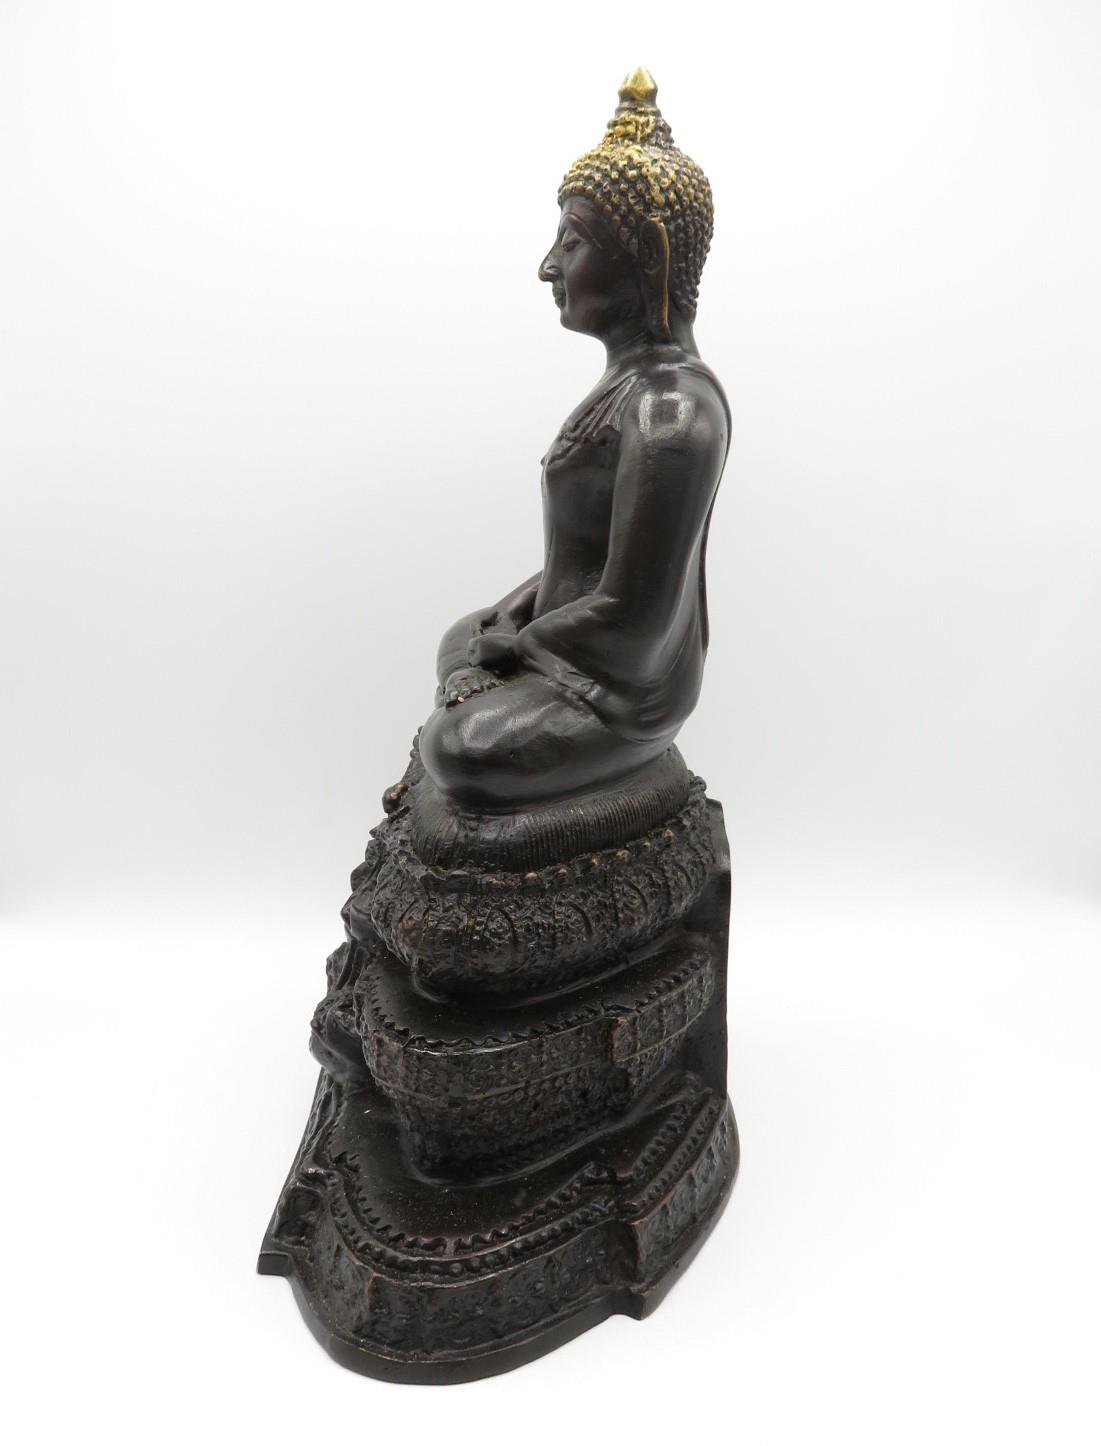 A bronze Buddha 11 inches high 3.1kg weight - Image 6 of 6